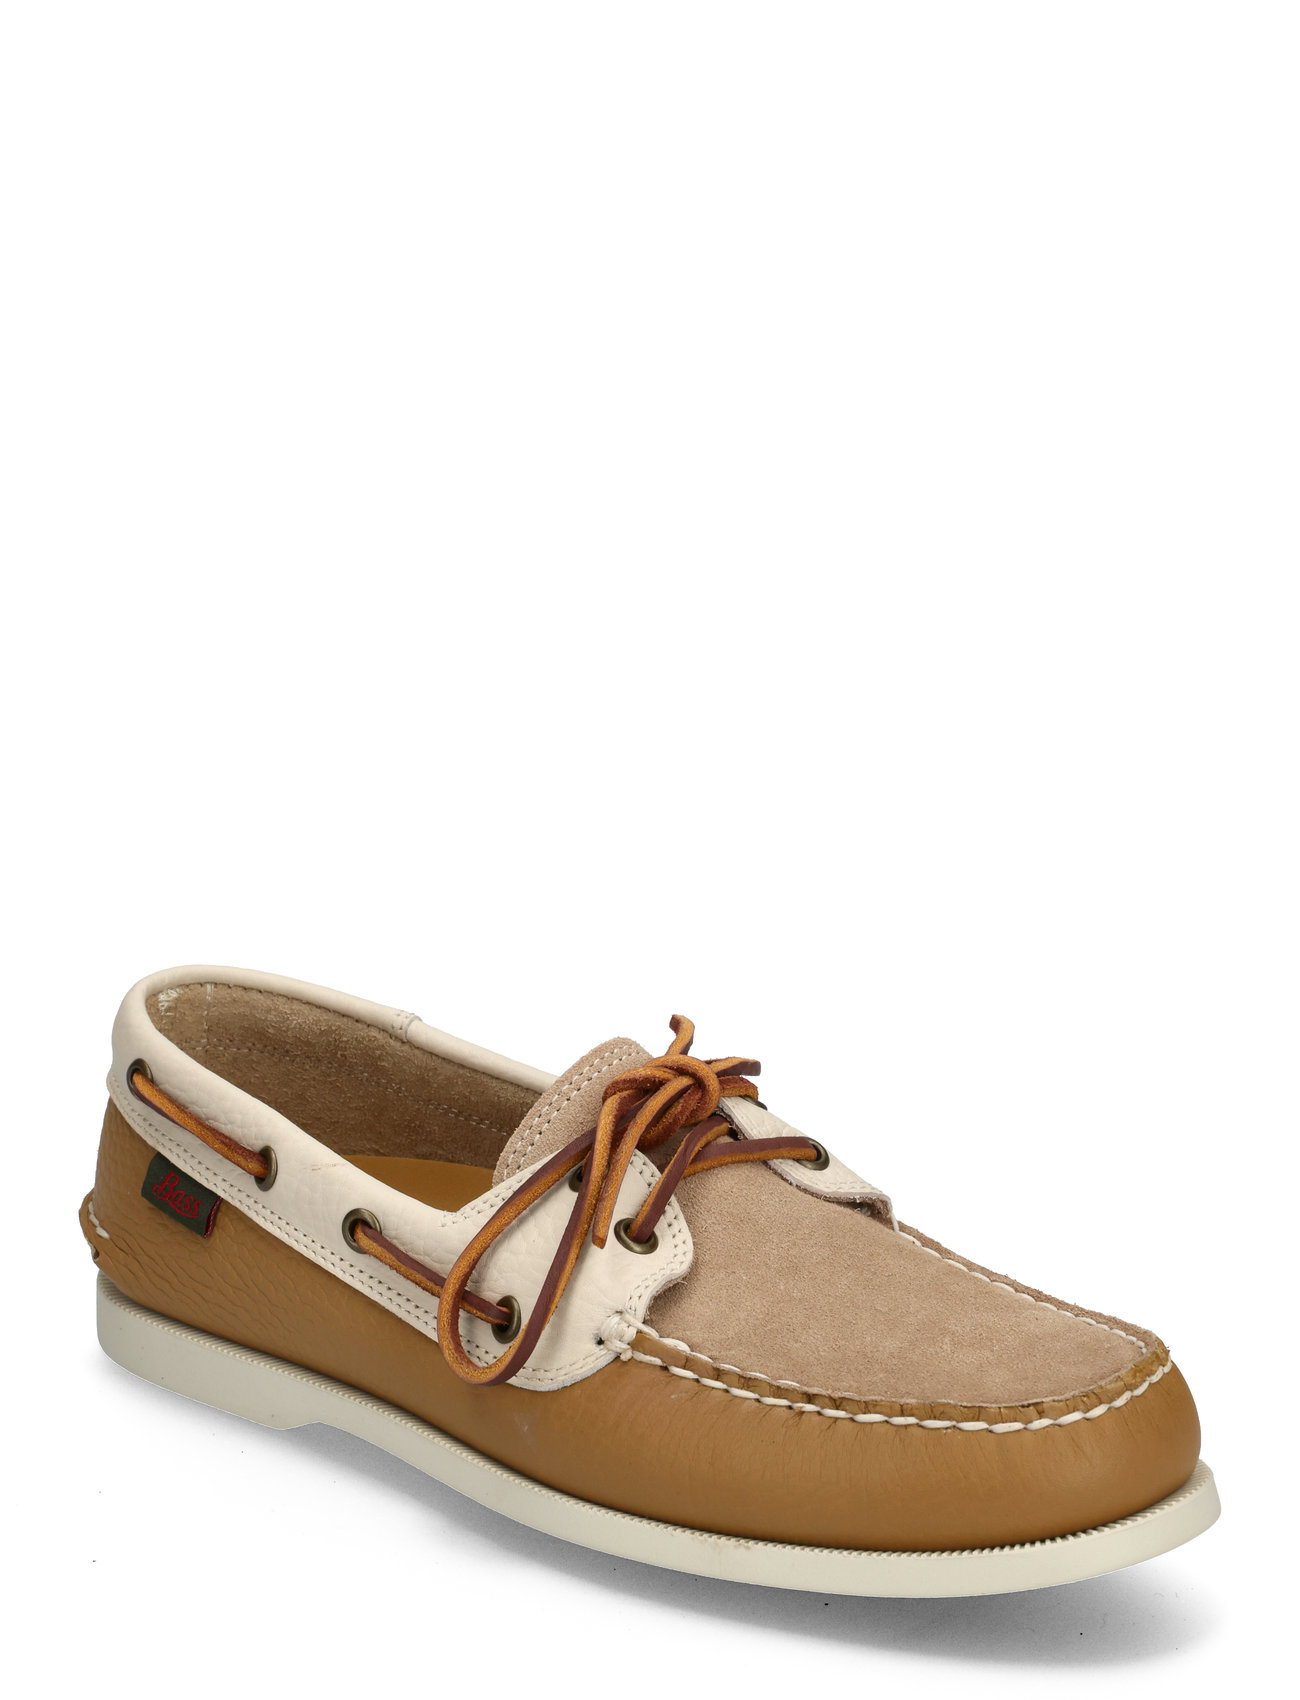 G.H. BASS Gh 2 Eye Boater Mix - Boat shoes 